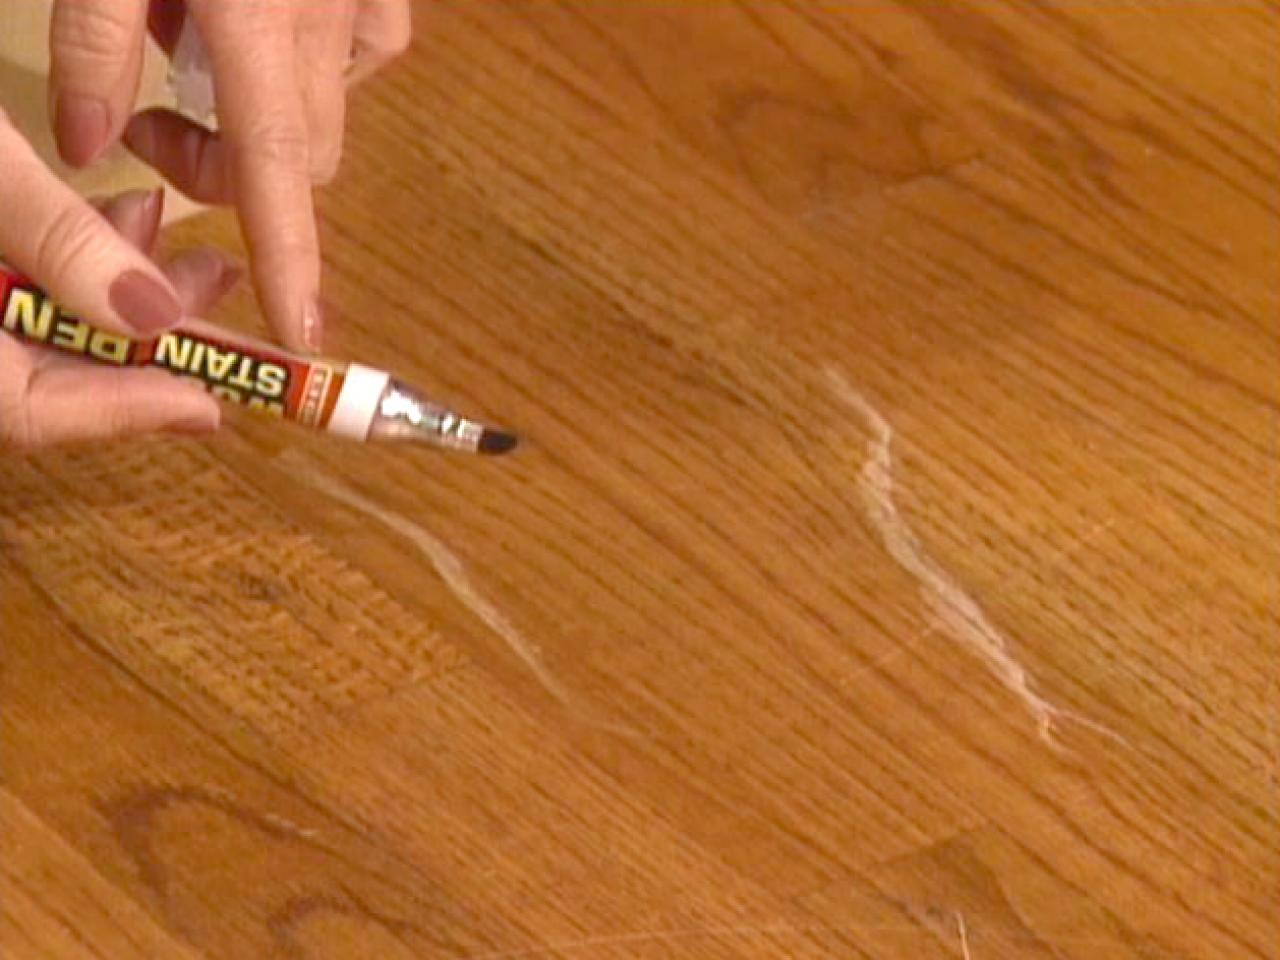 How To Touch Up Wood Floors Tos Diy, Remove Scratches Laminate Wood Floors